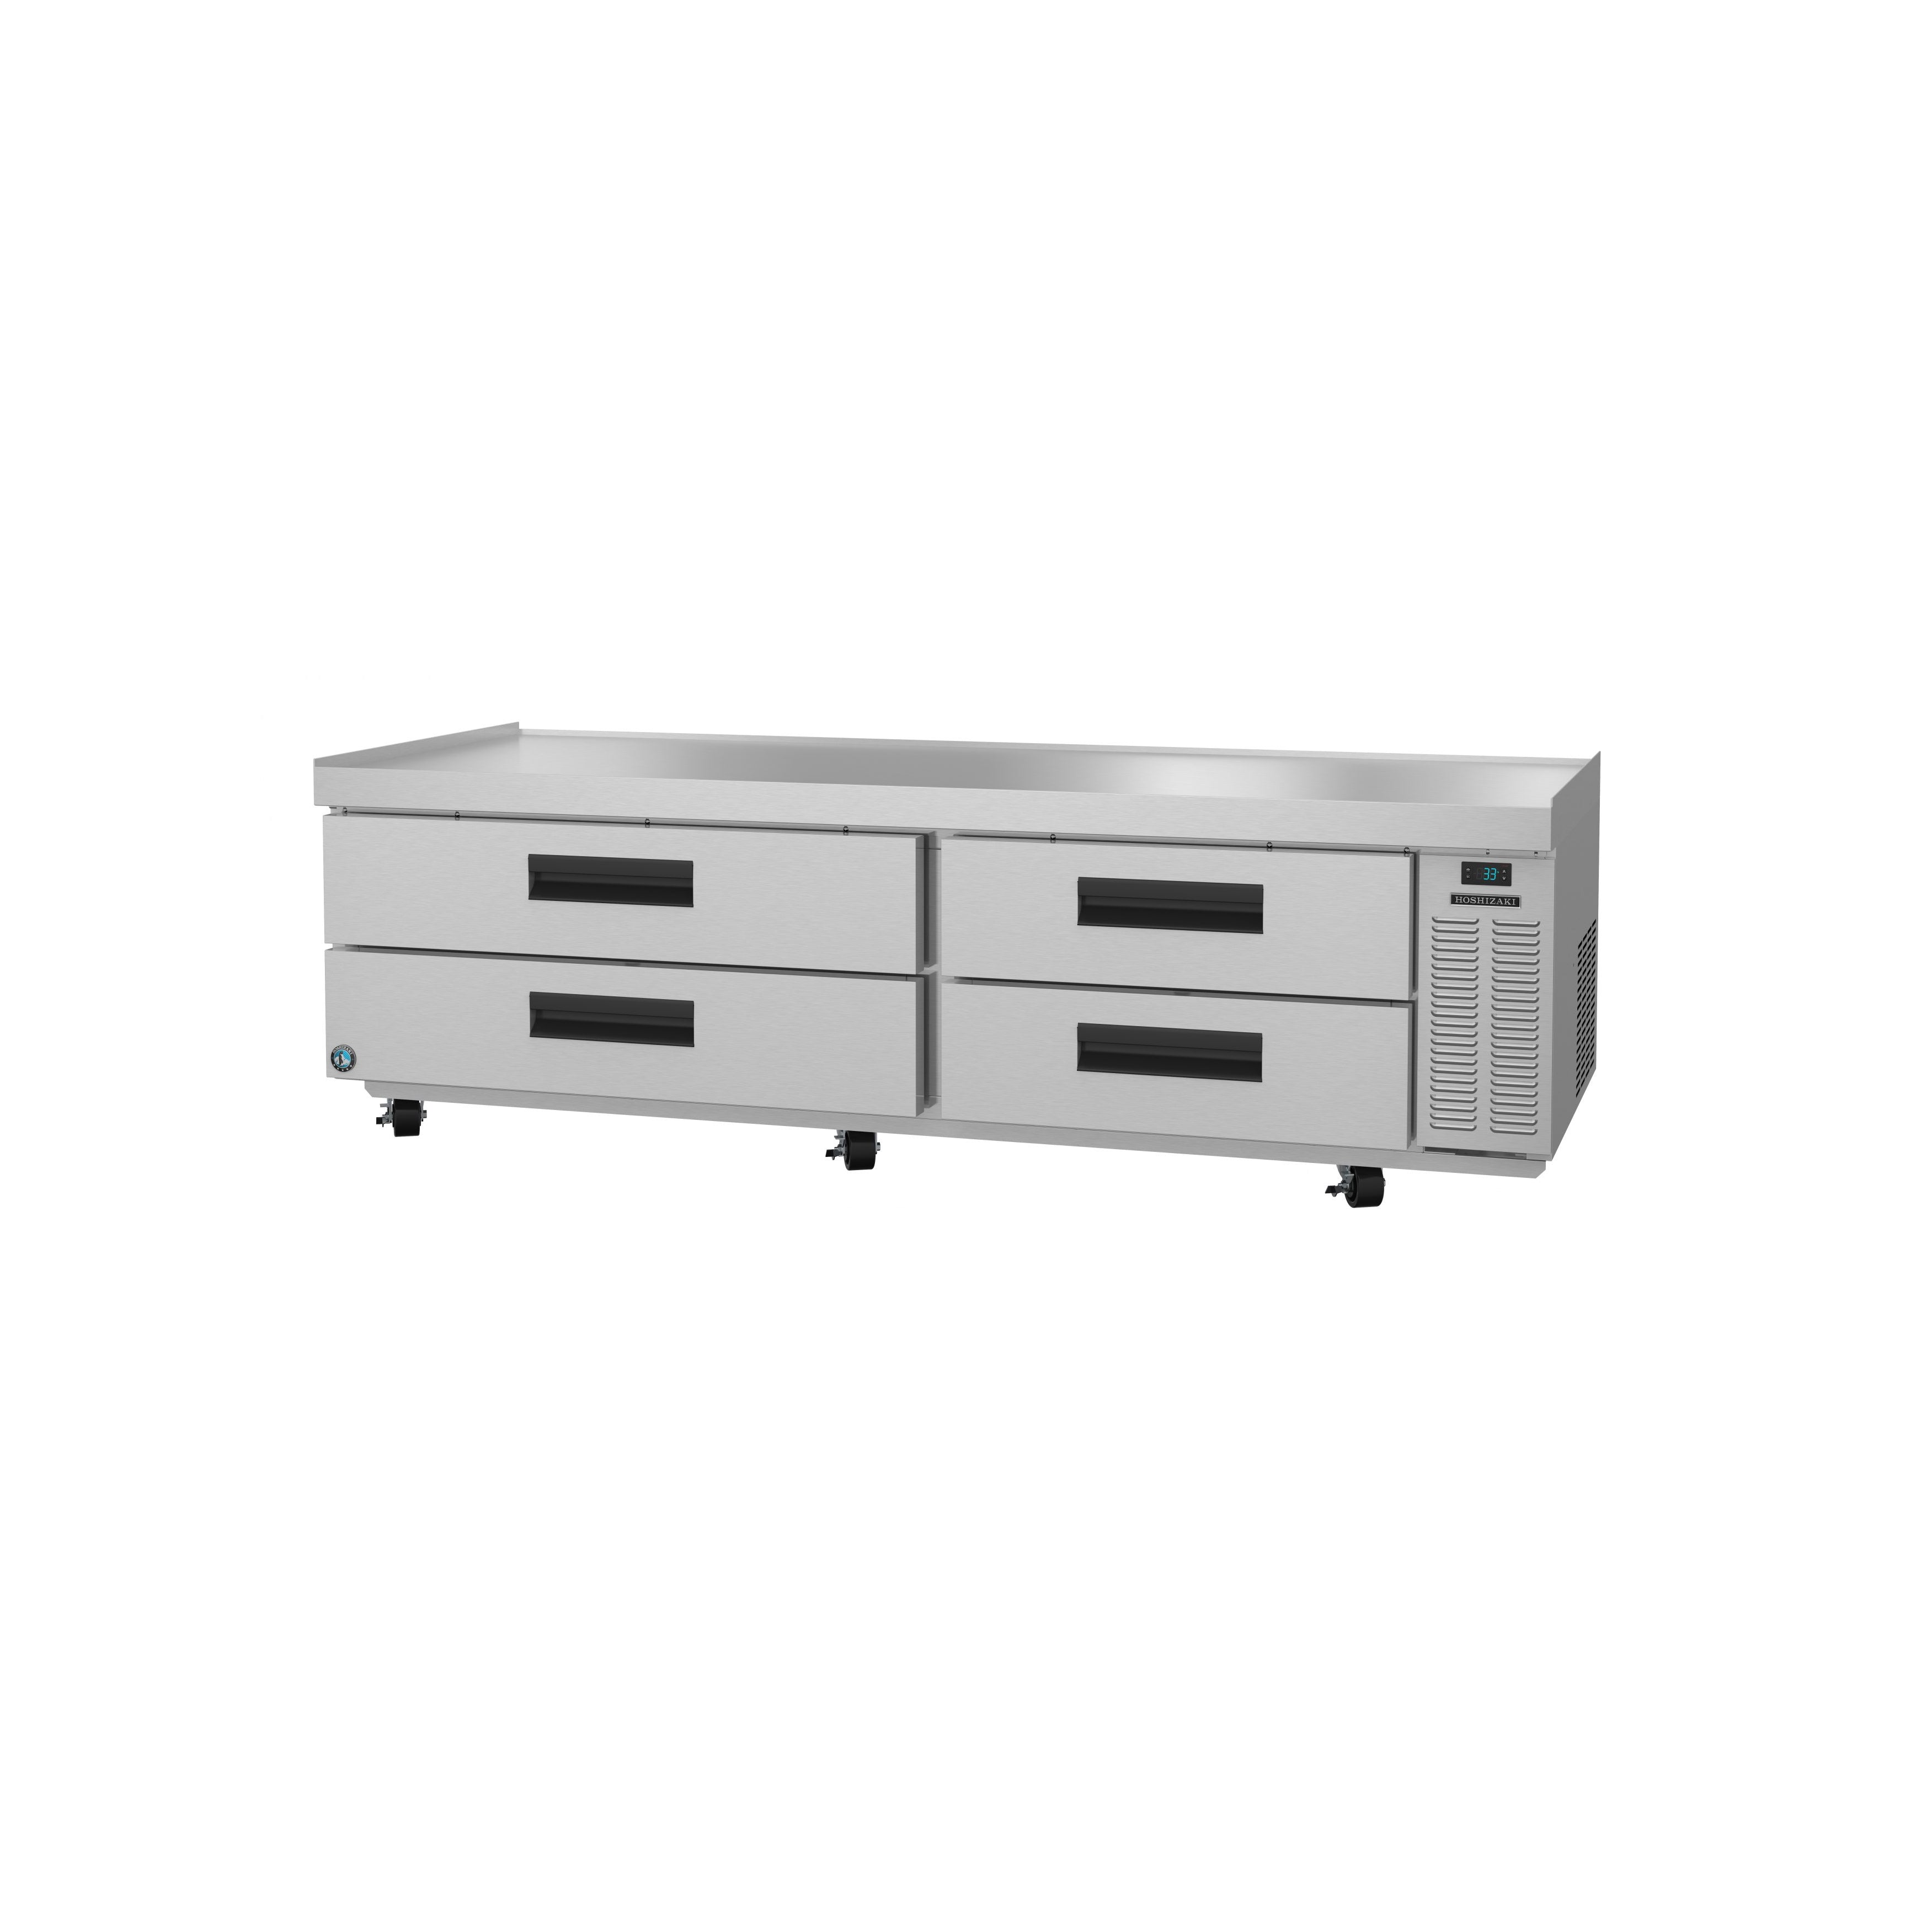 Hoshizaki - CR85A, Commercial 85" 4 Drawer Refrigerated Chef Base 21.1 cu. ft.